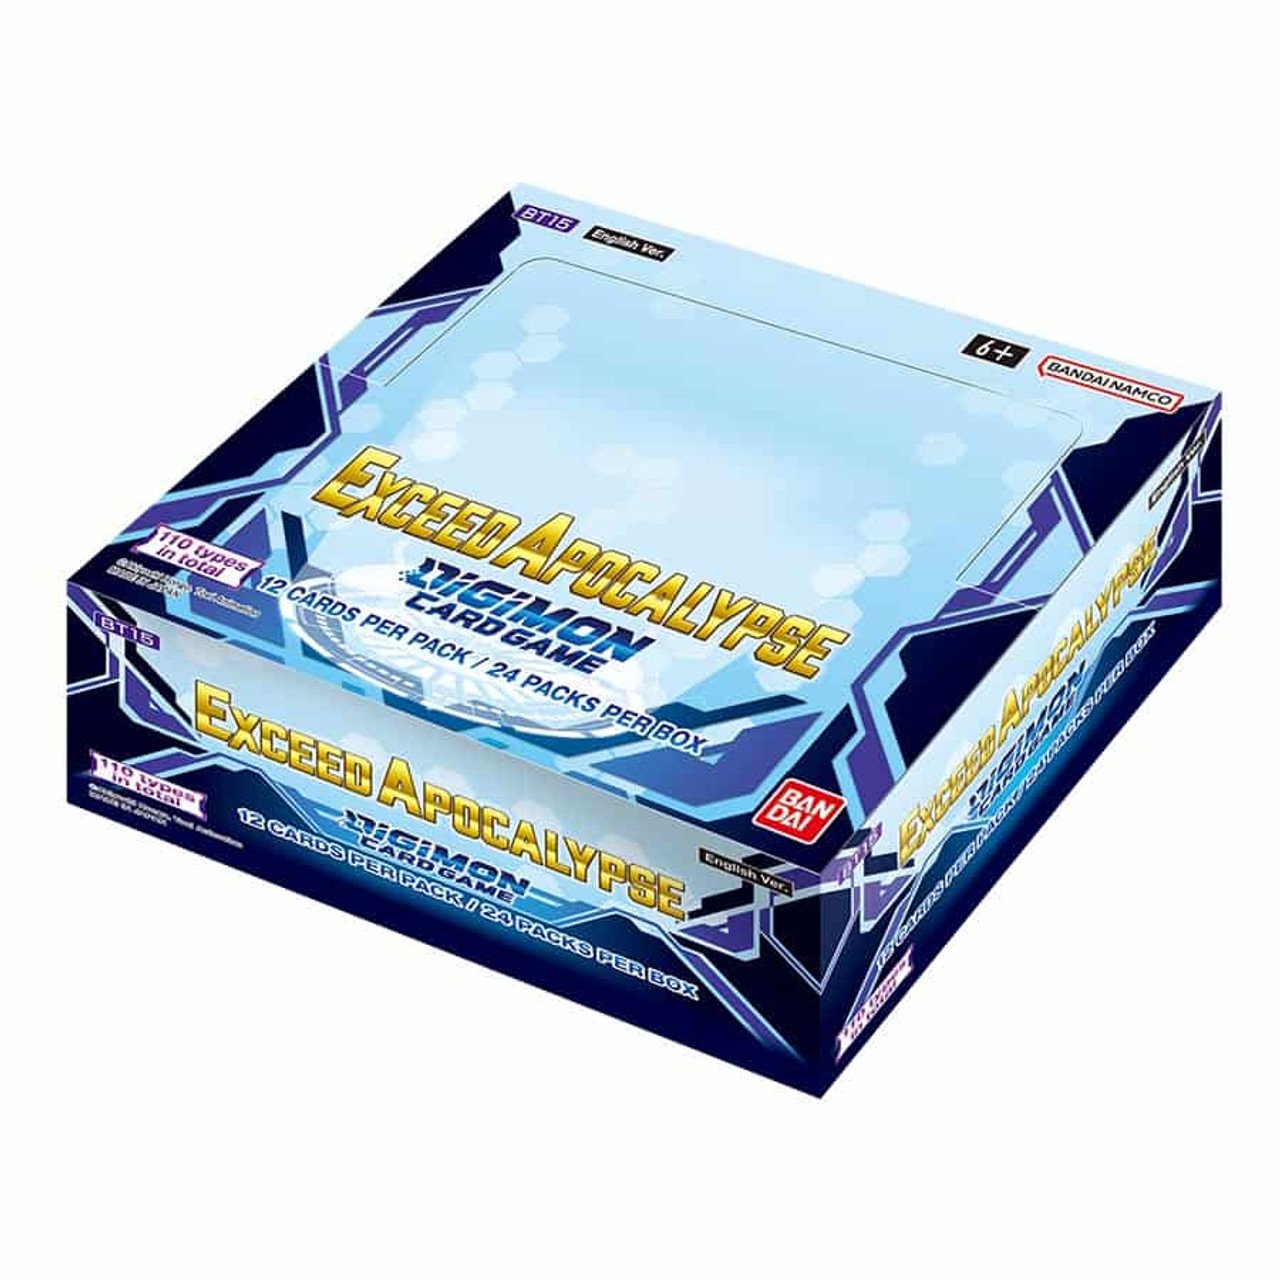 BT-15: Exceed Apocalypse Booster Box